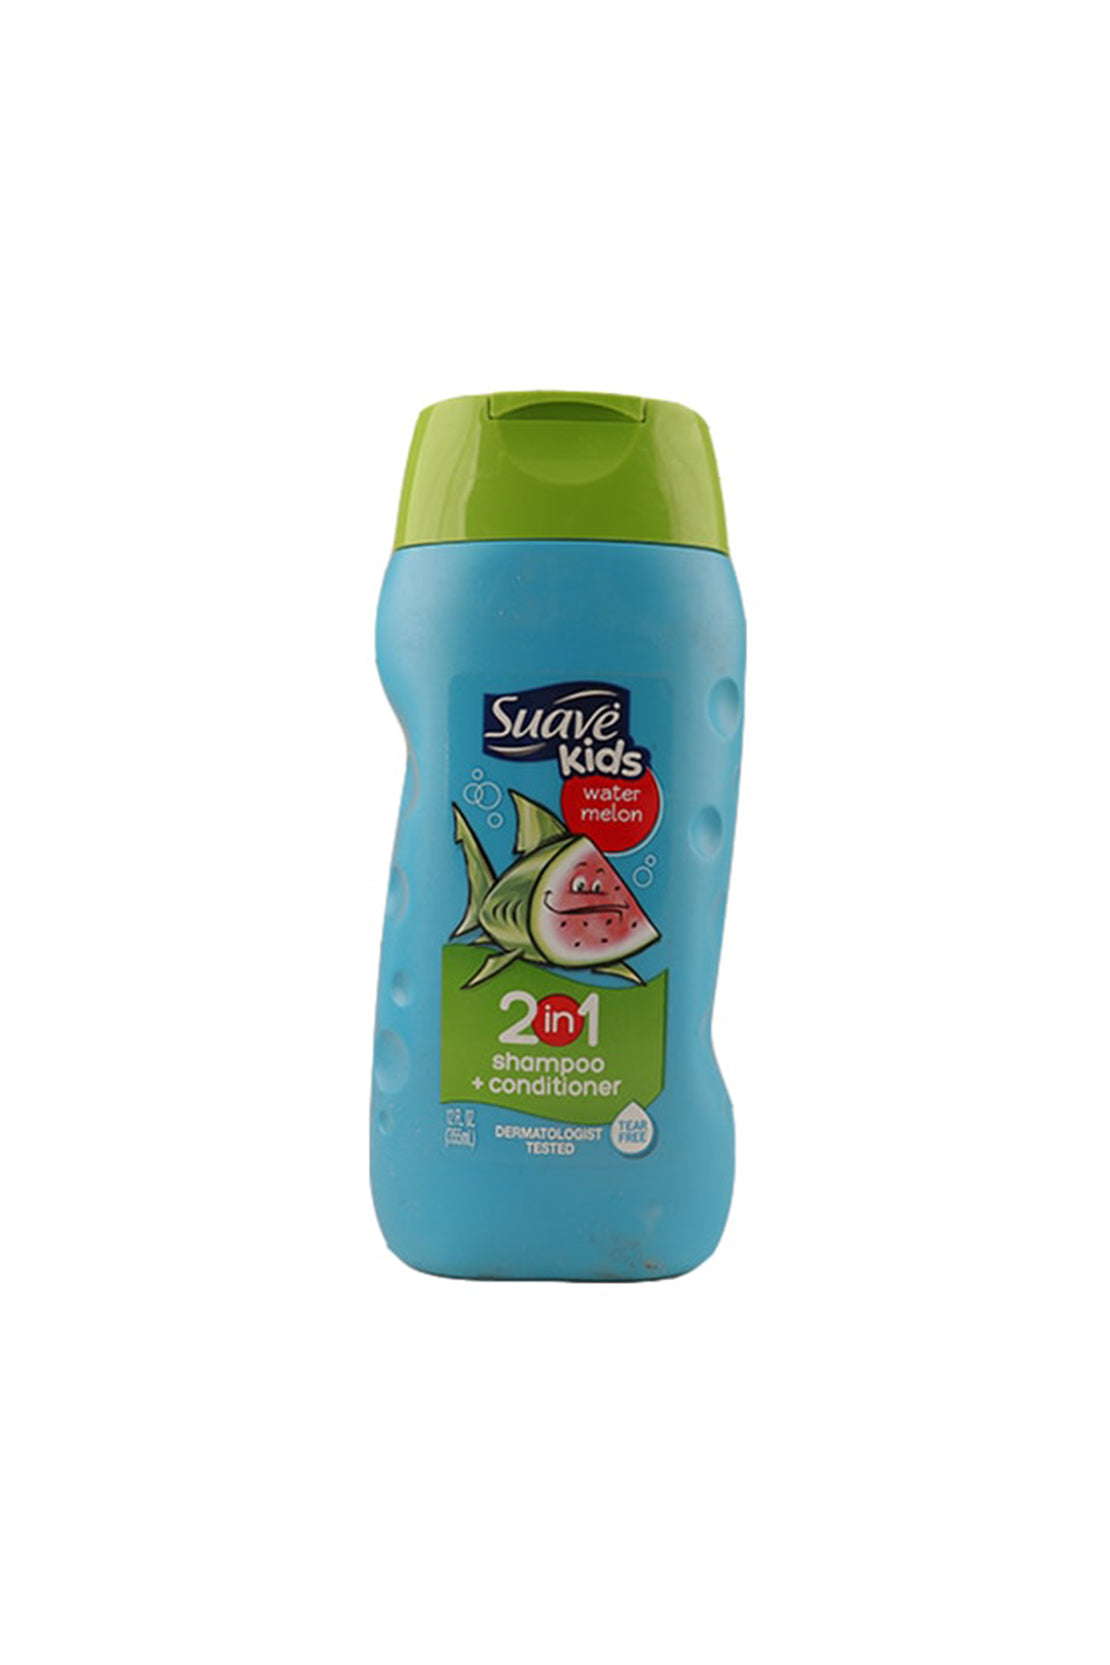 2in1 Kids Watermelon Smoother Shampoo And Conditioner 335ml RIOS